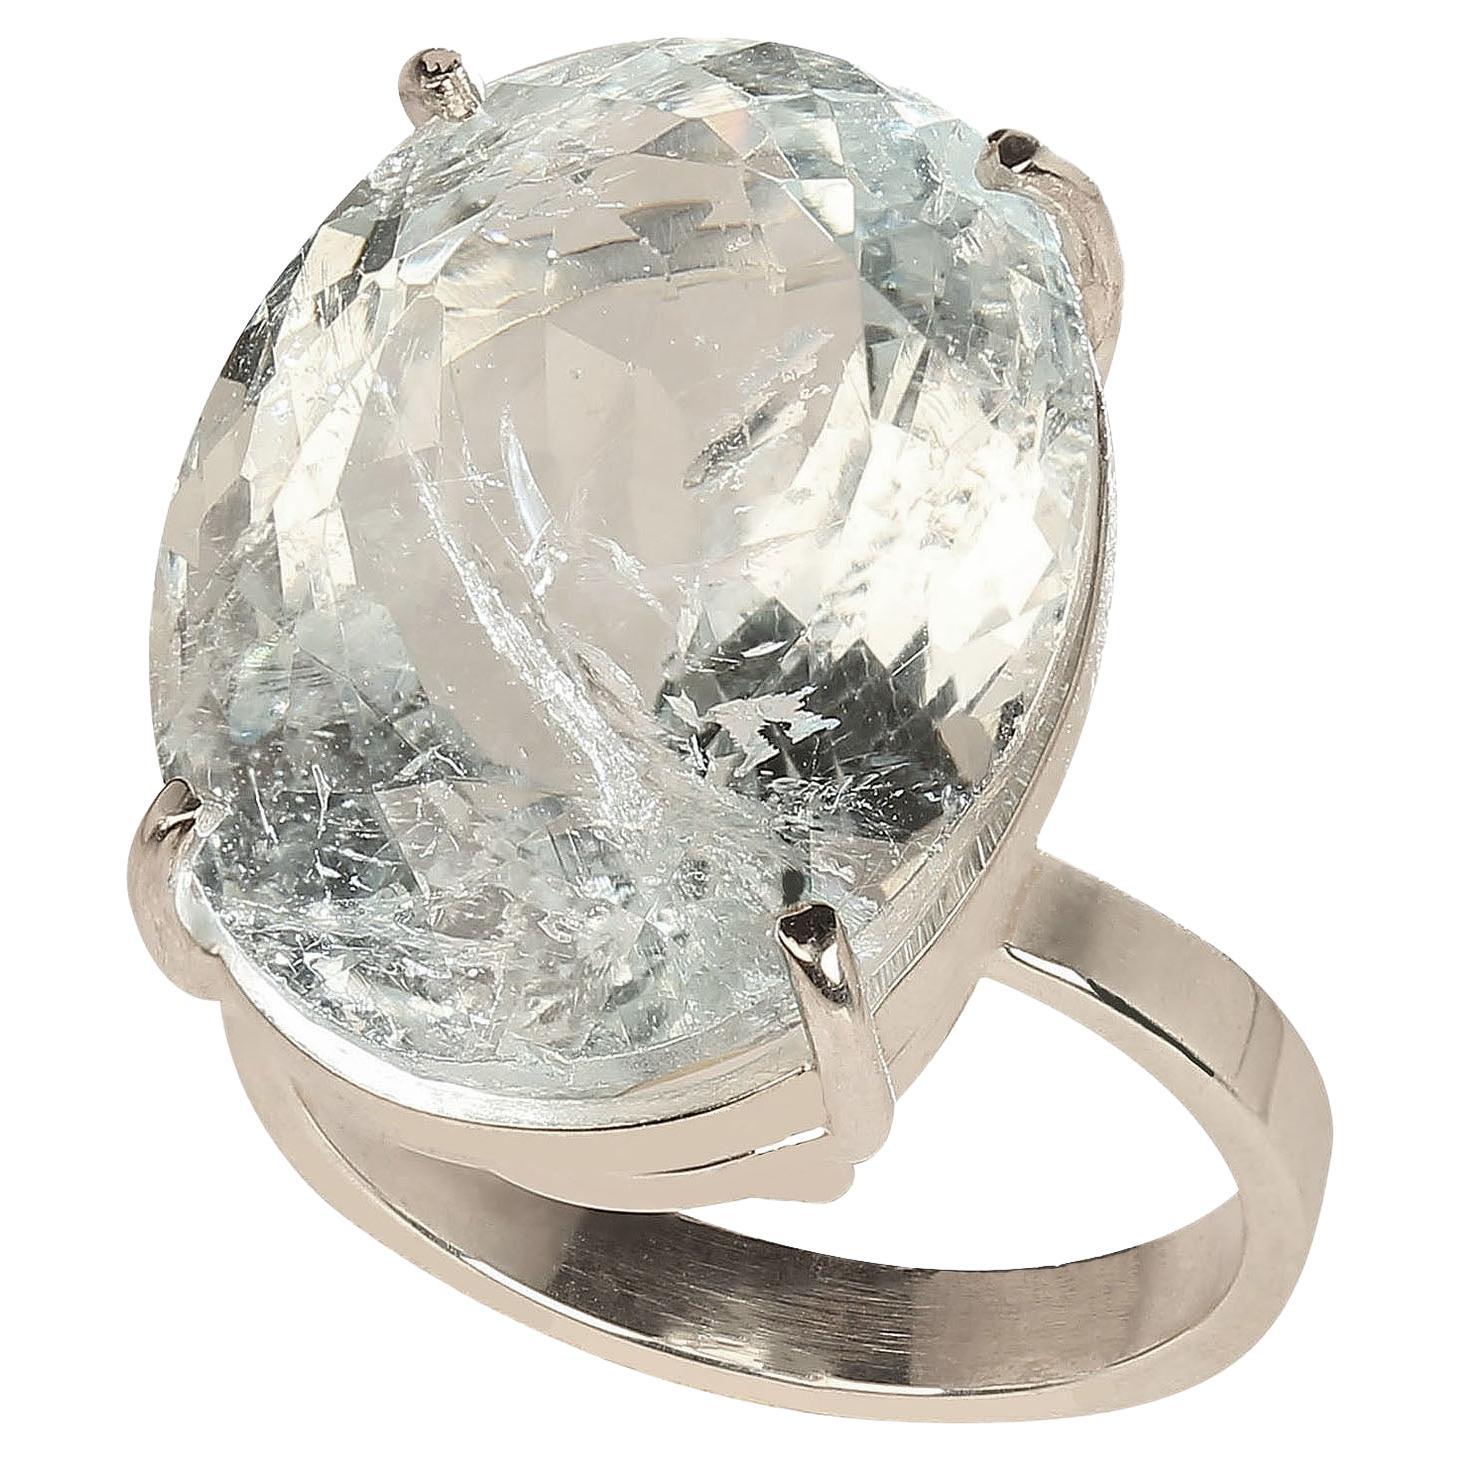 Glittering, oval 23 carat Aquamarine ring. This stunning ring comes straight from our favorite vendor in Belo Horizonte, Minas Gerais, Brazil. He mines his gemstones from his own aquamarine mine, and then has the rough cut and faceted.  We discuss